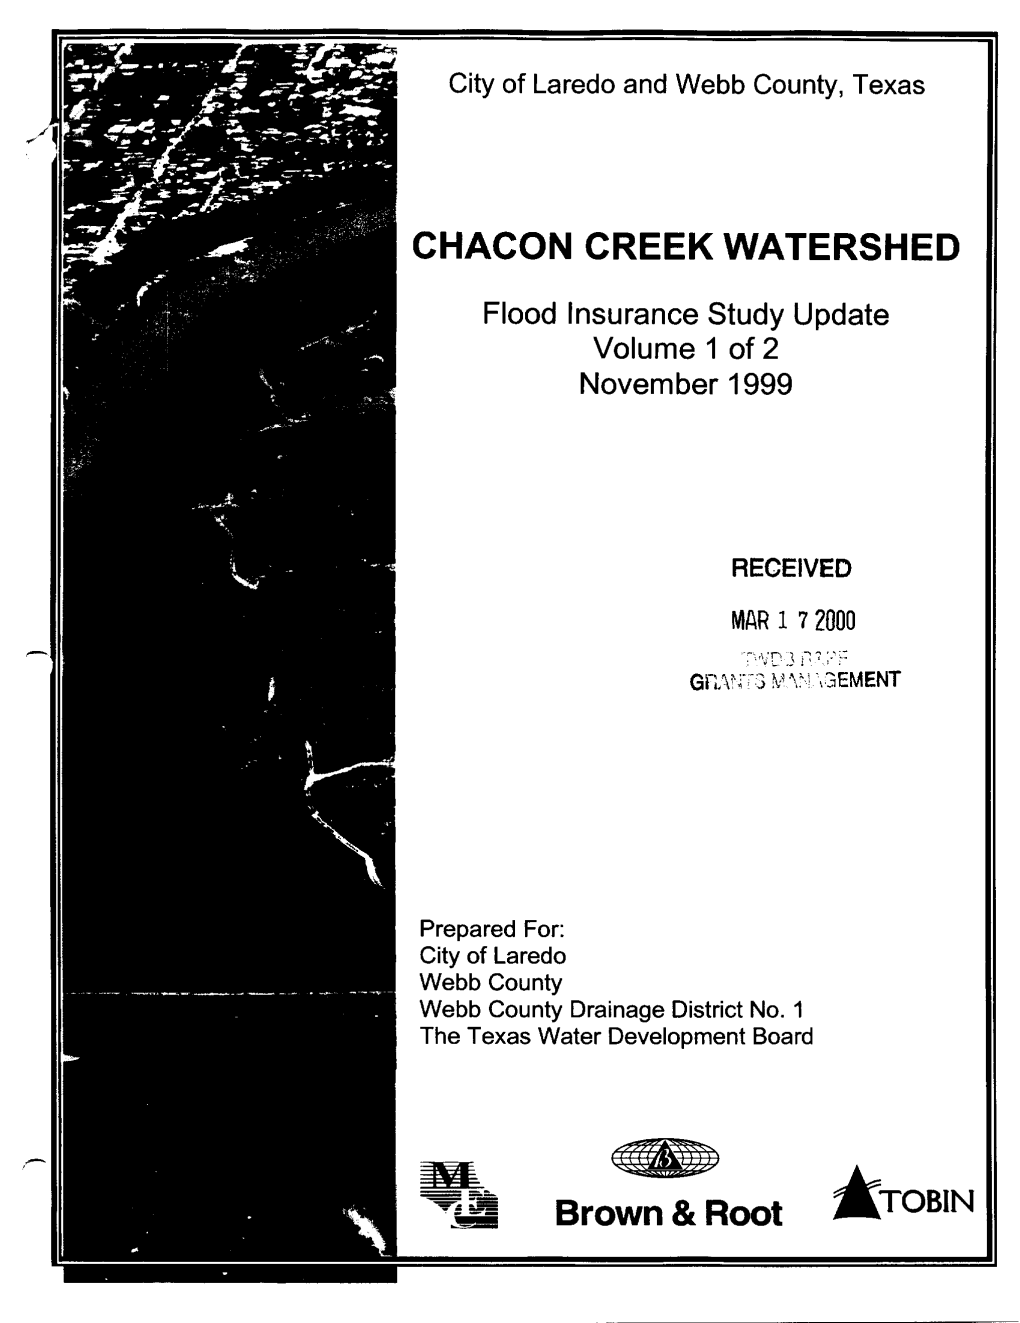 Chacon Creek Watershed